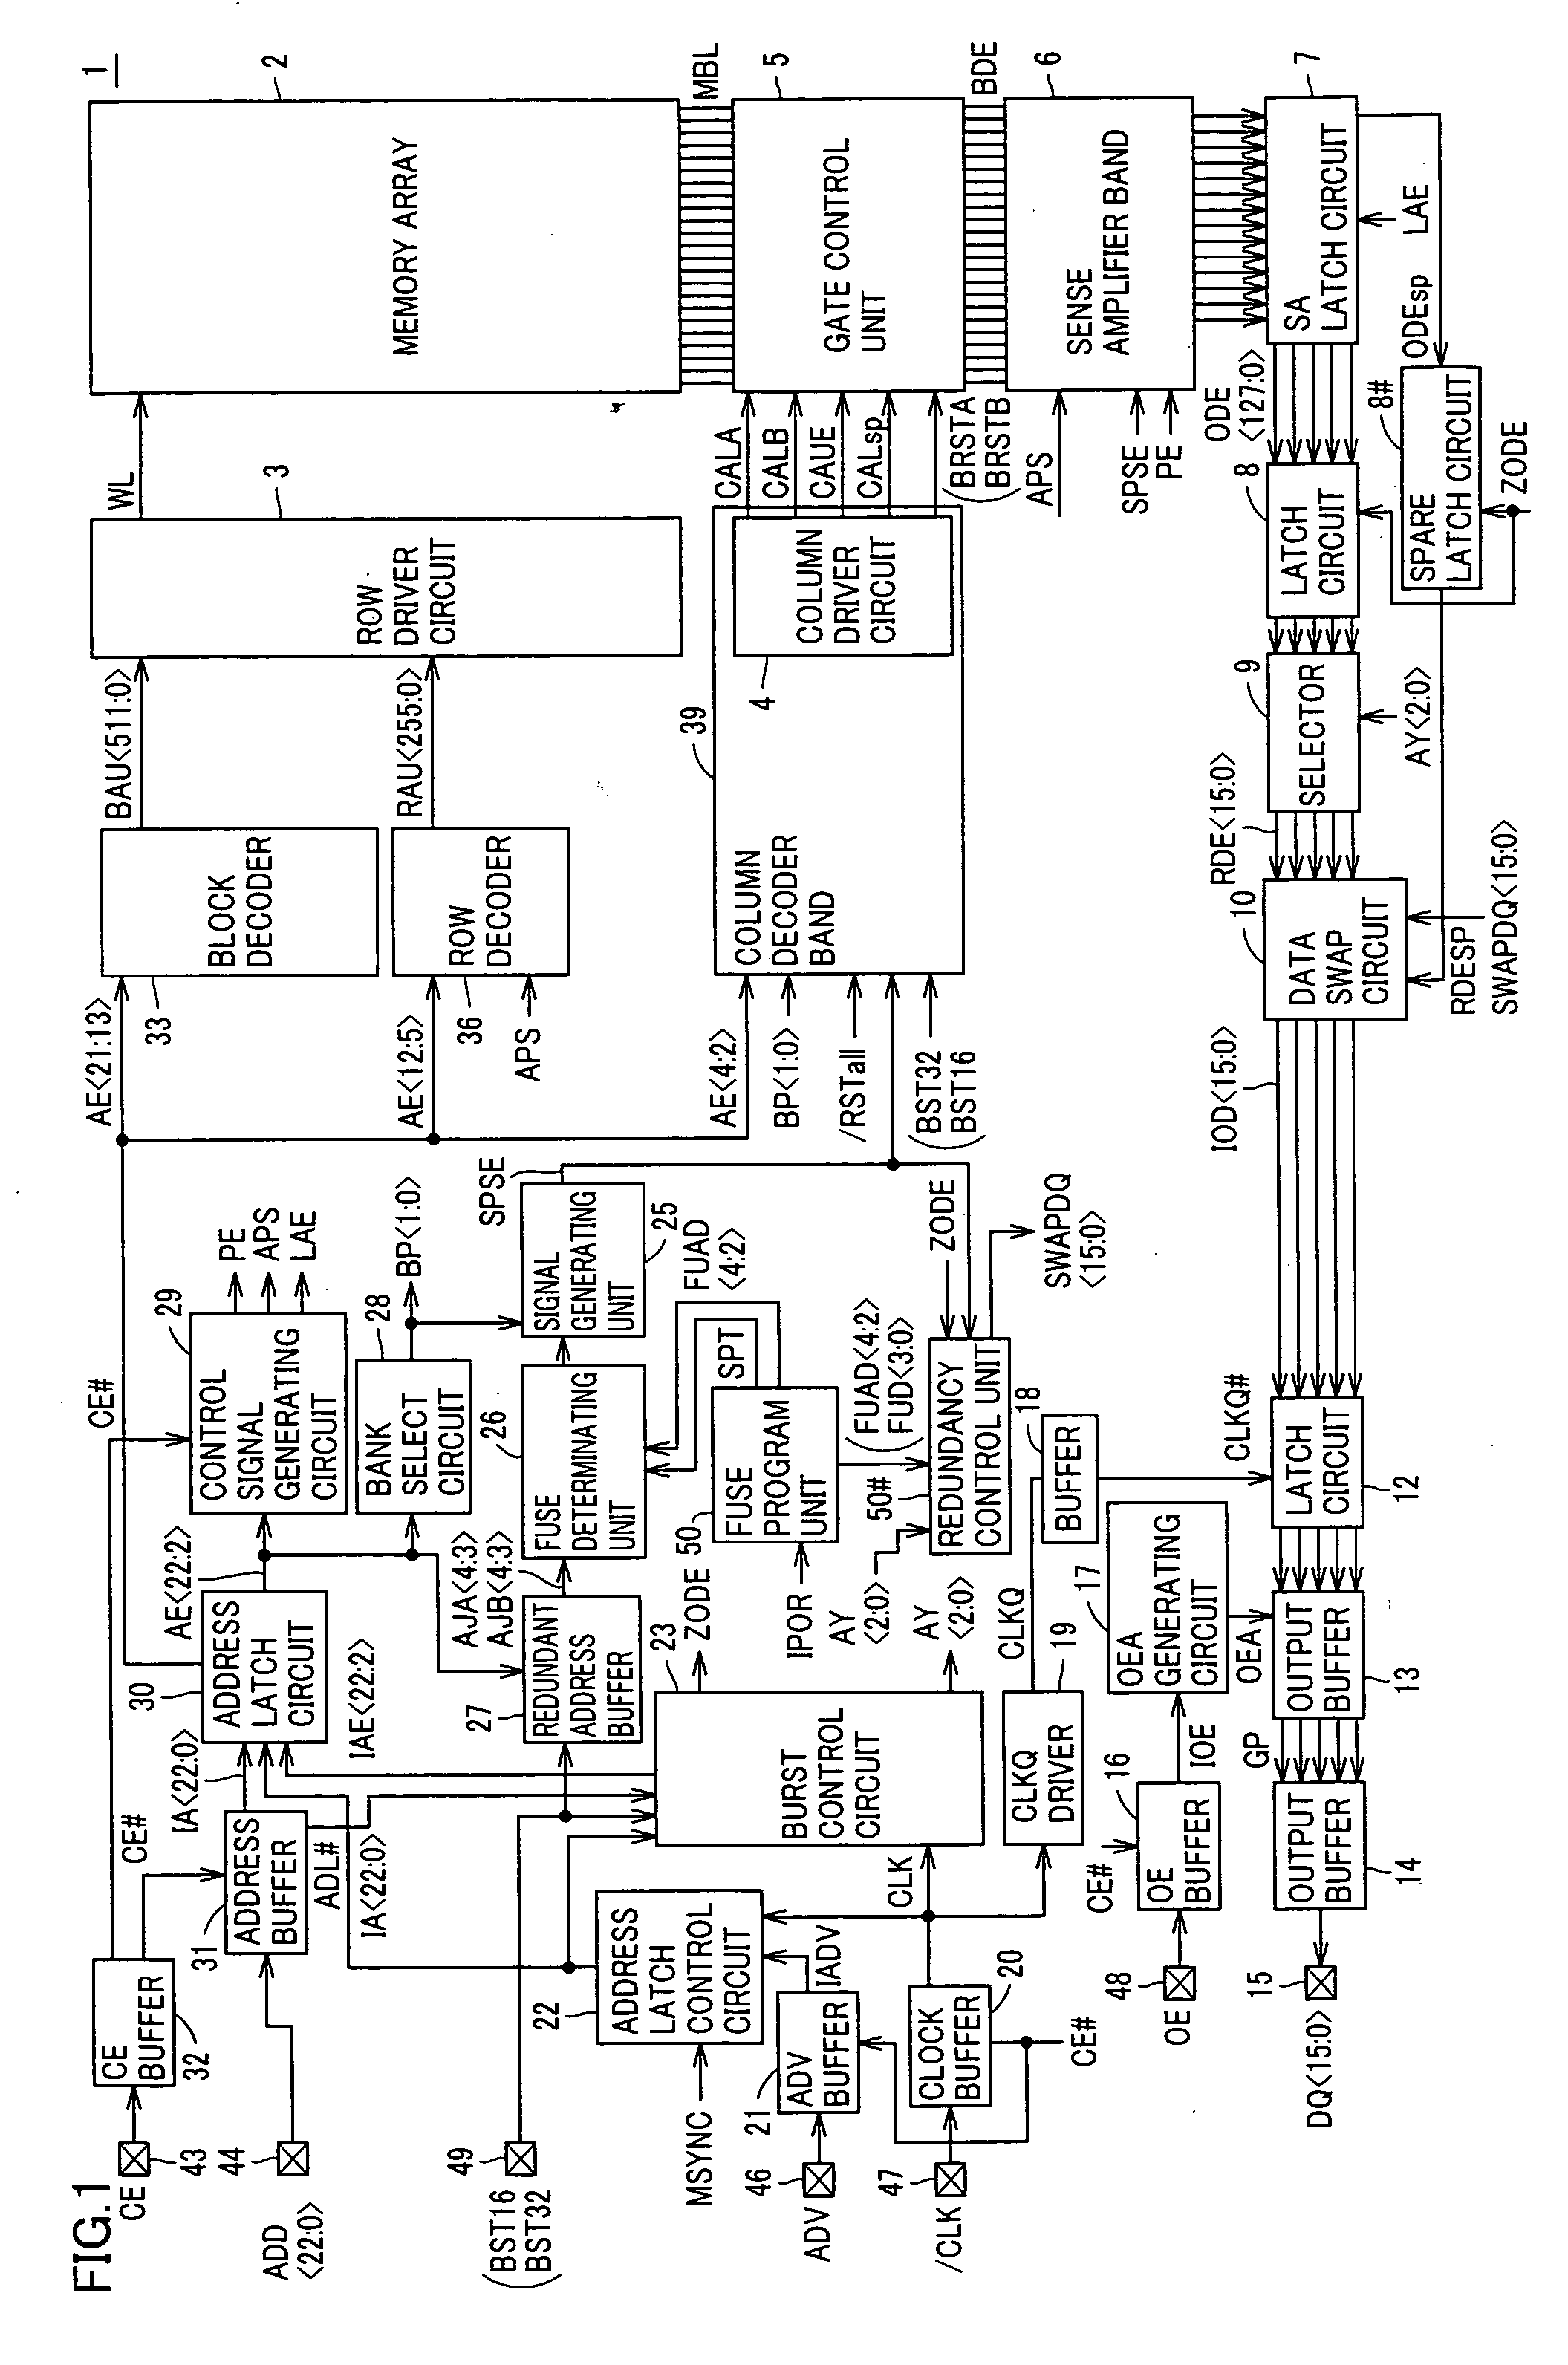 Semiconductor memory device for improving access time in burst mode